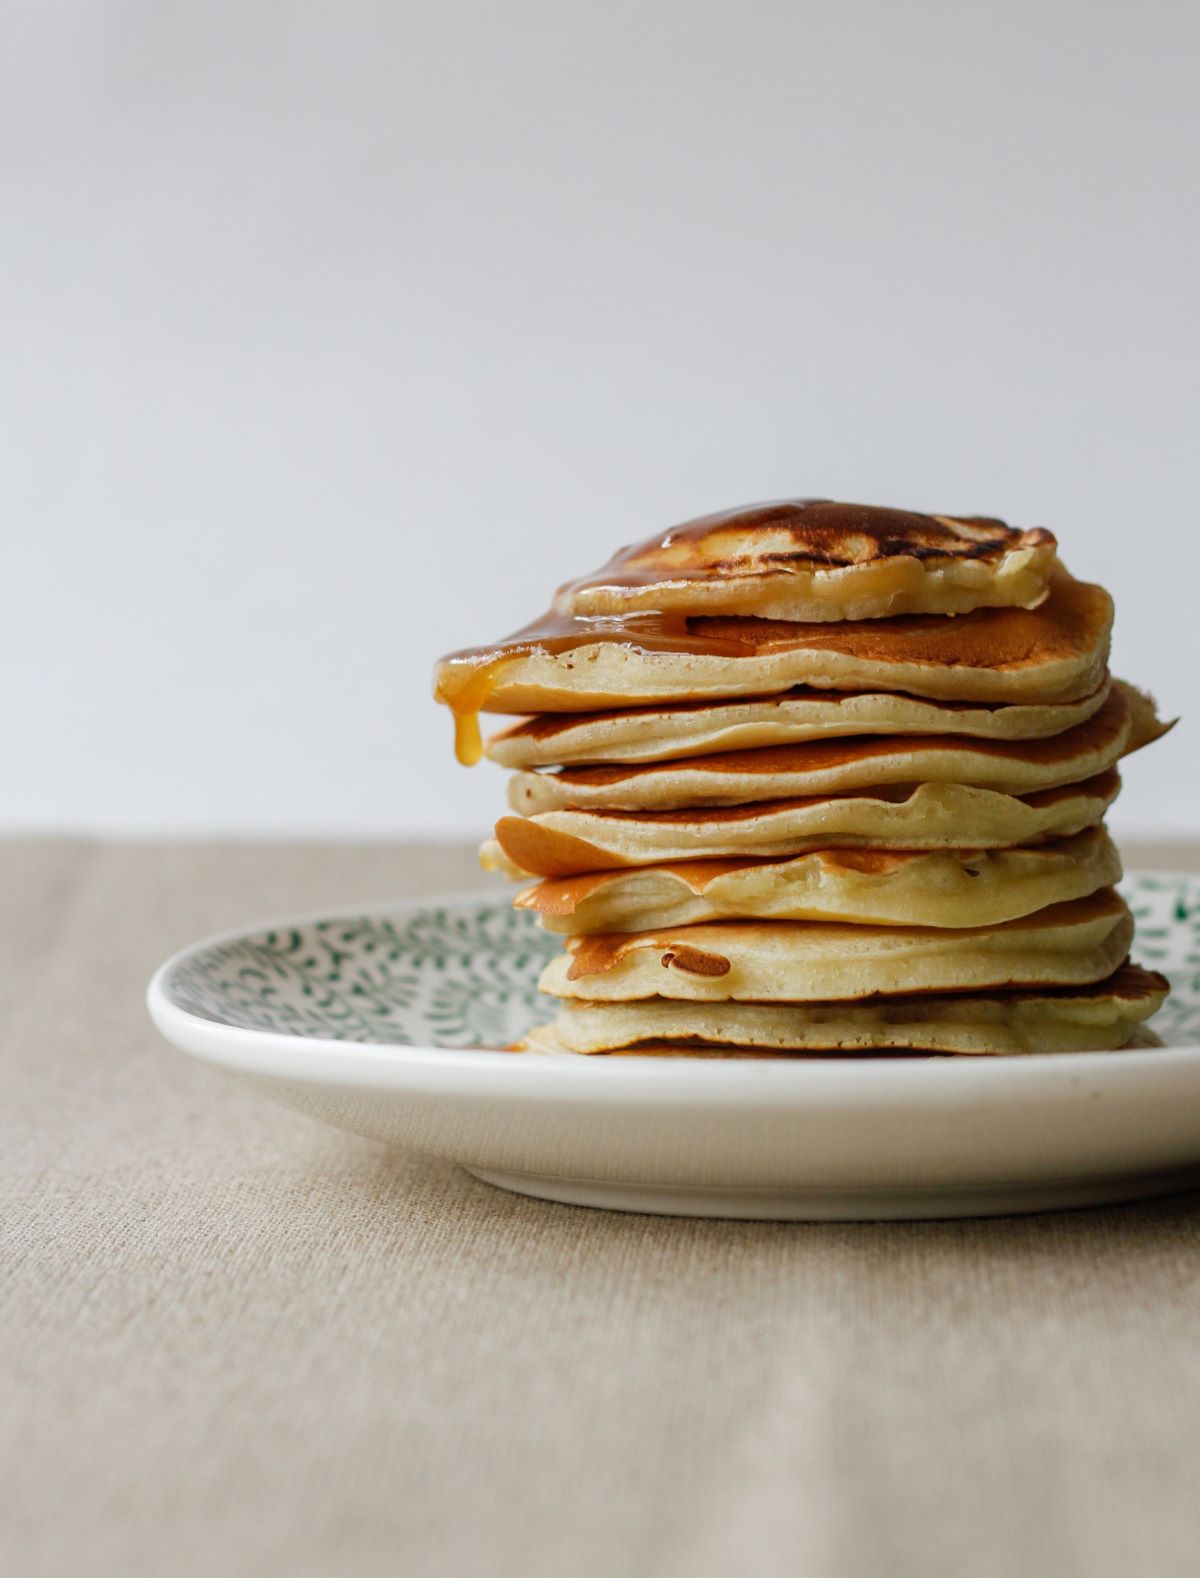 A plate stacked high with pancakes.